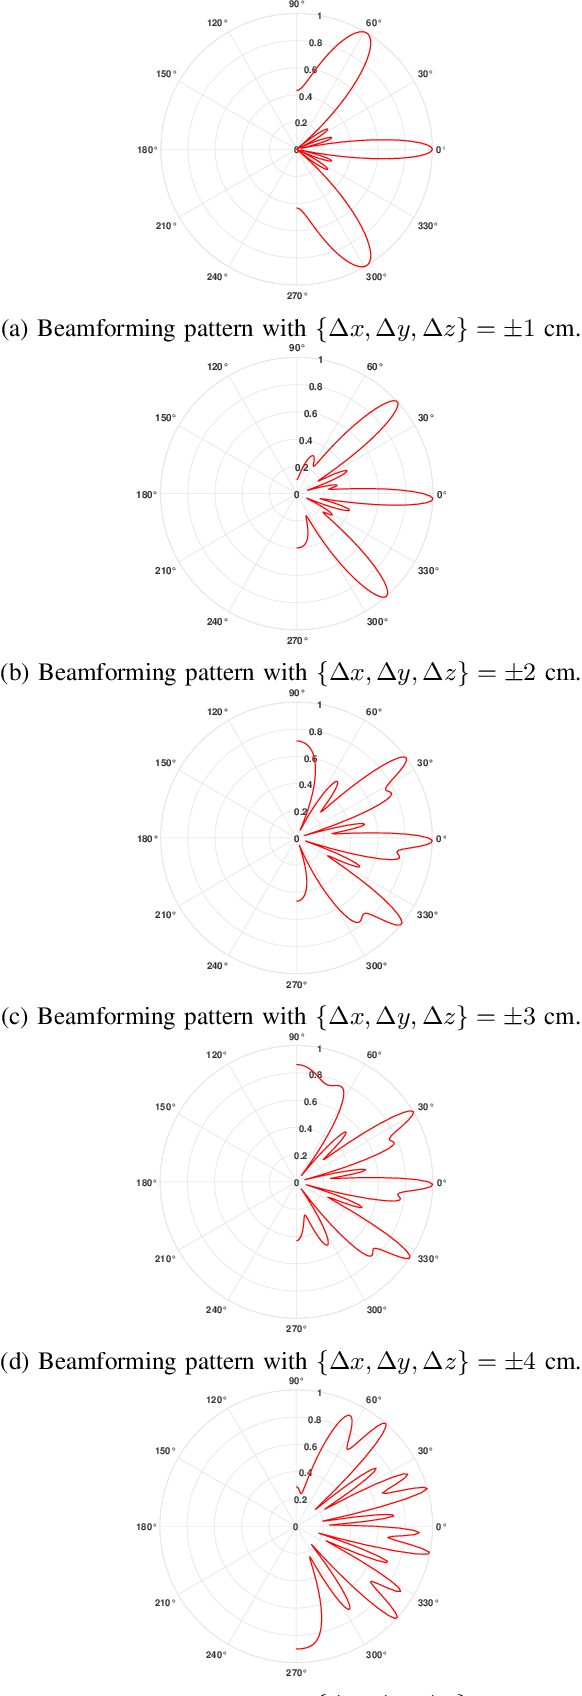 Figure 2 for Distributed 3D-Beam Reforming for Hovering-Tolerant UAVs Communication over Coexistence: A Deep-Q Learning for Intelligent Space-Air-Ground Integrated Networks